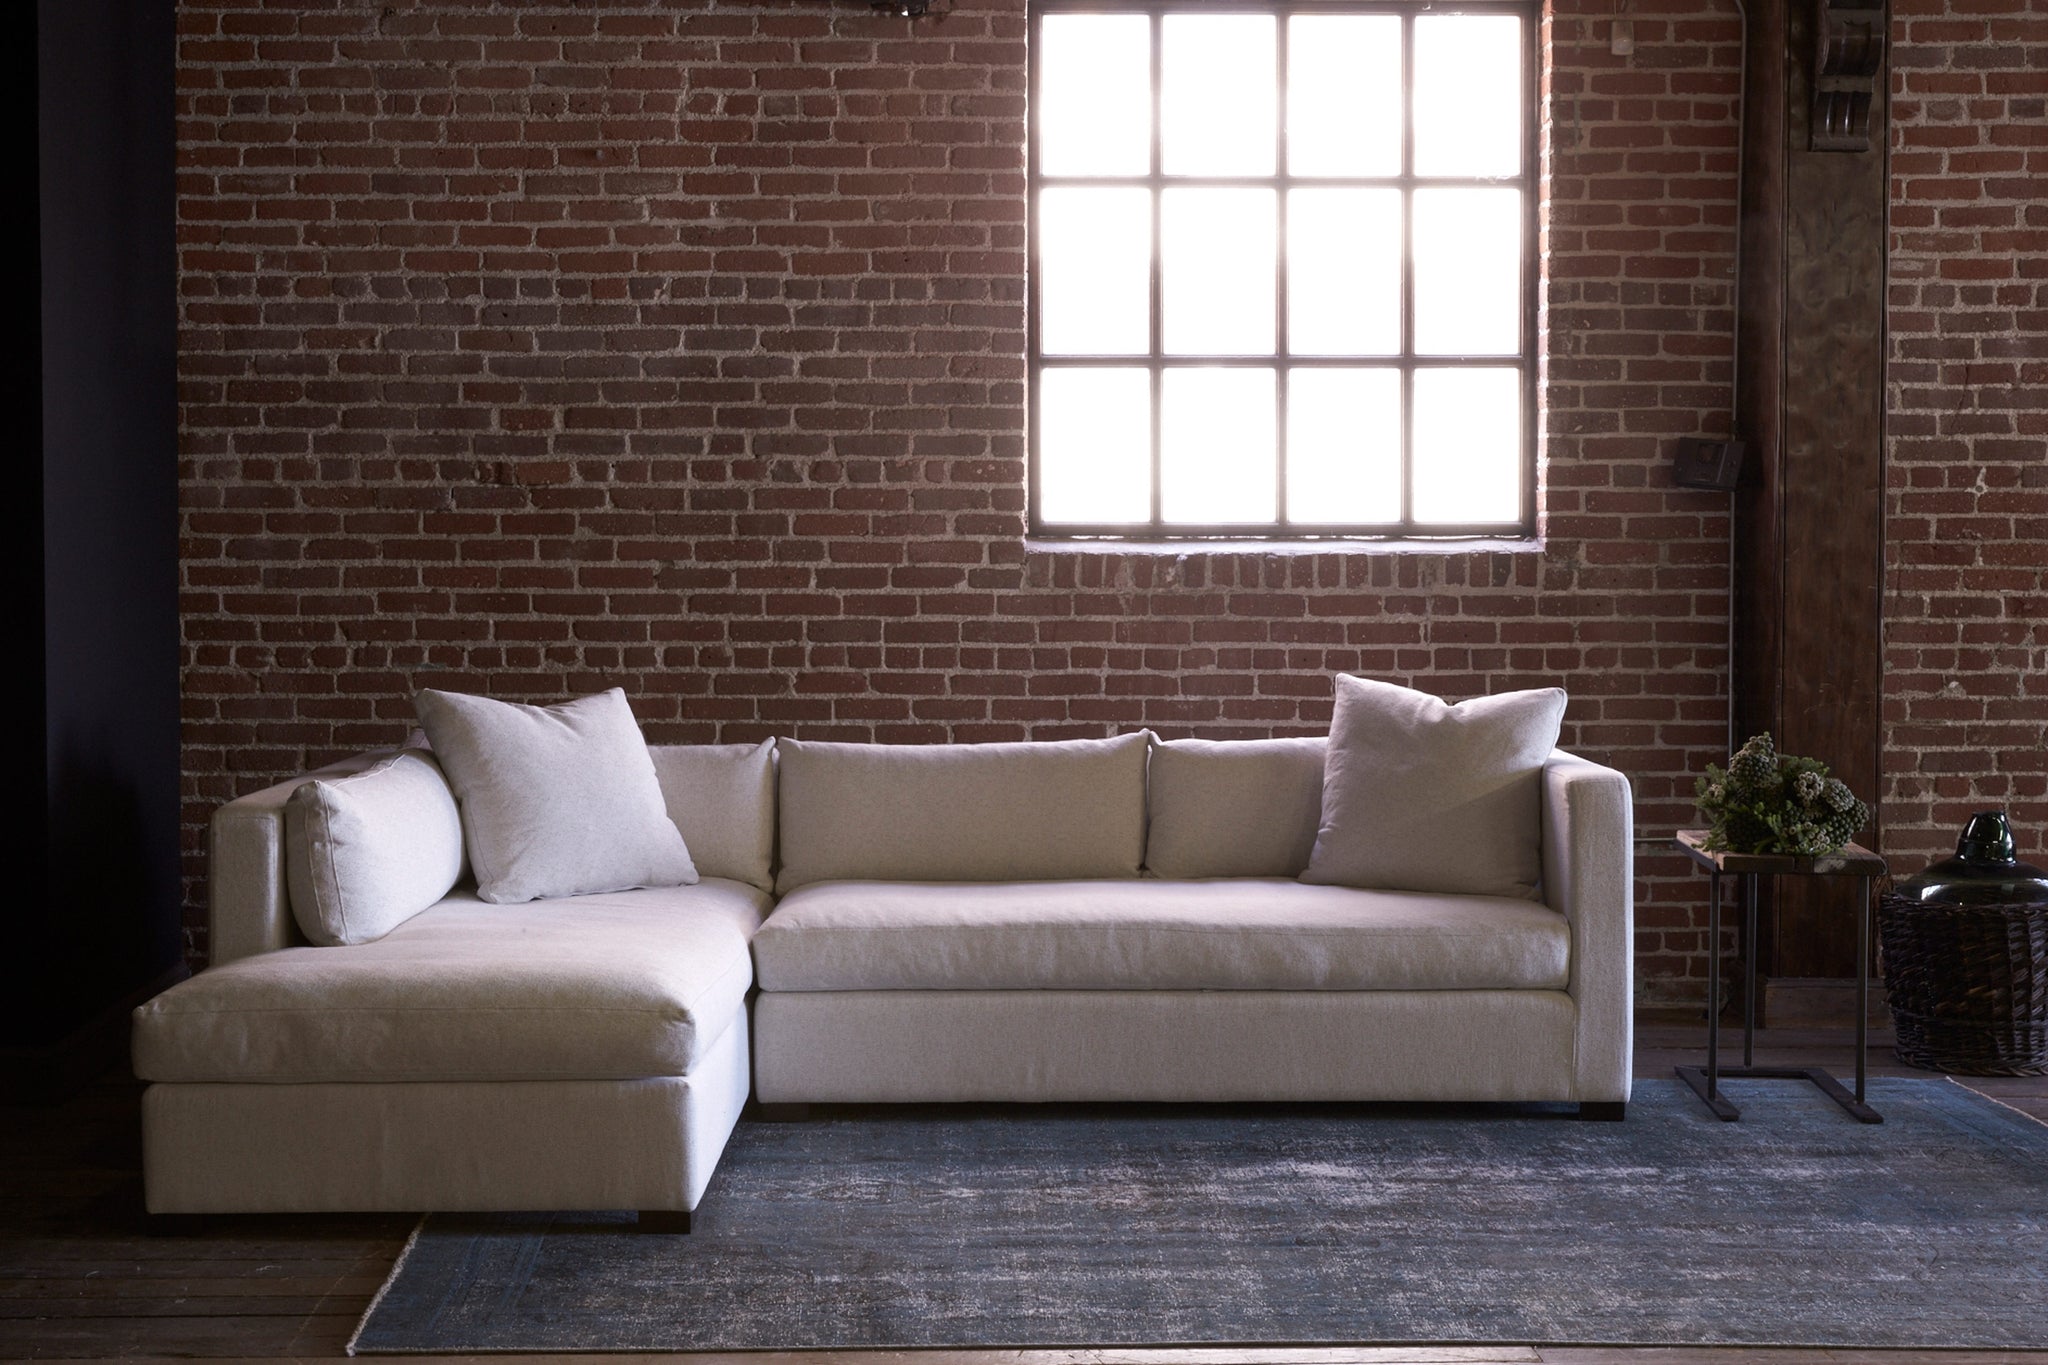  The Agosto sectional, left arm facing, in Adler Sand is in a room with dim light, in front of a brick wall with a large window behind. Photographed in Adler Sand. 